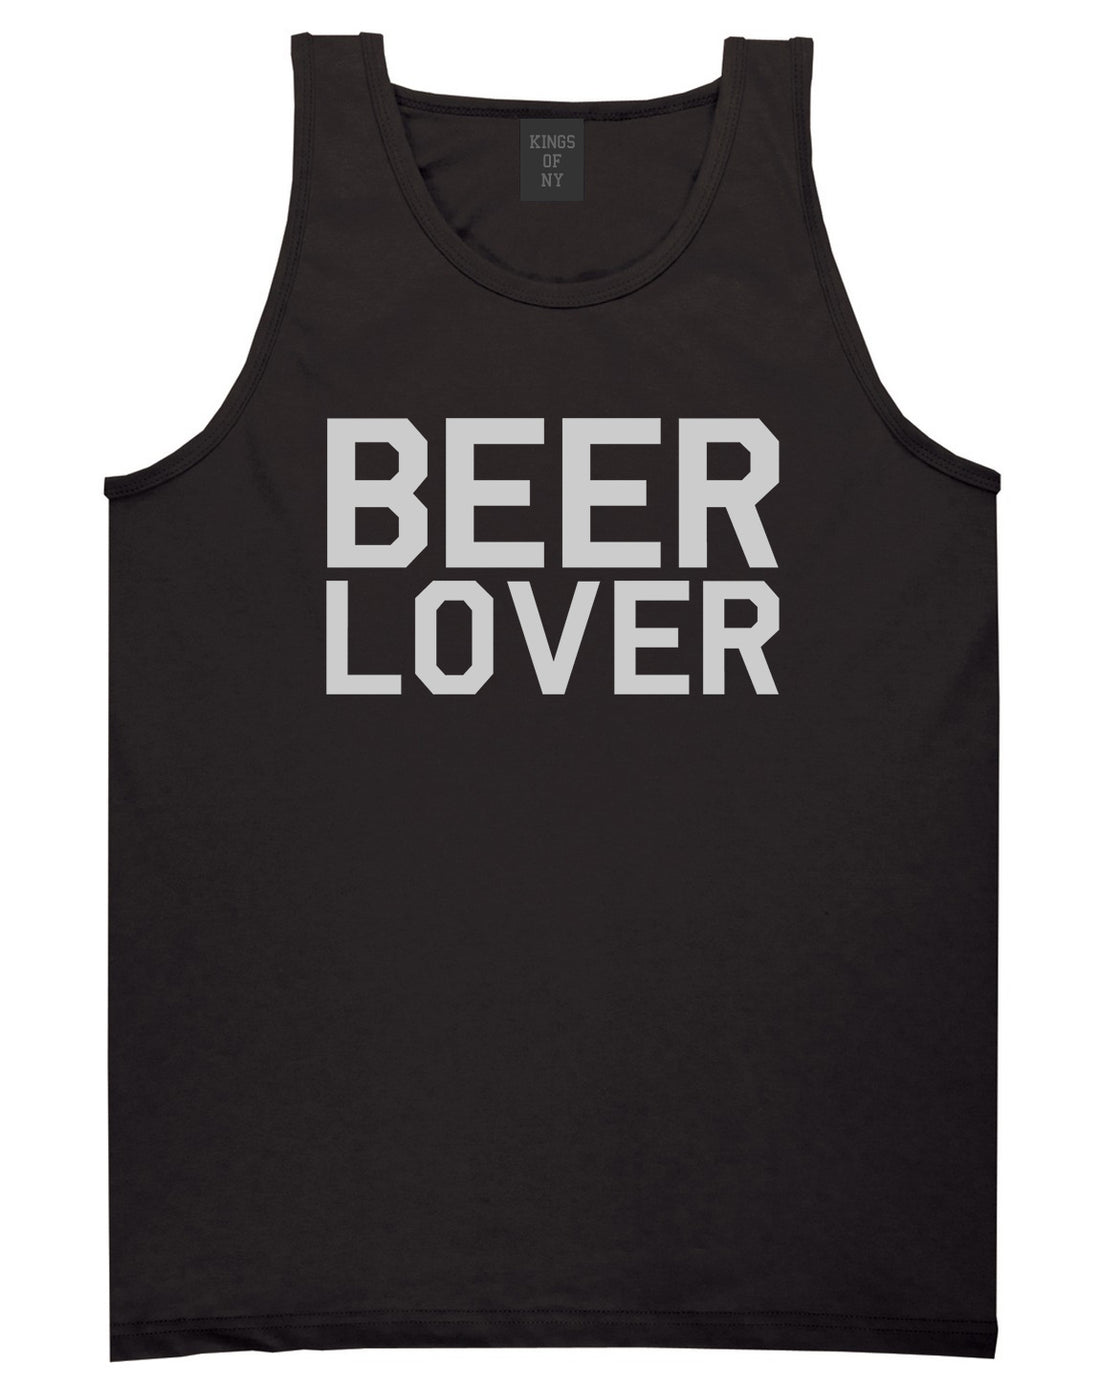 Beer_Lover_Drinking Mens Black Tank Top Shirt by Kings Of NY